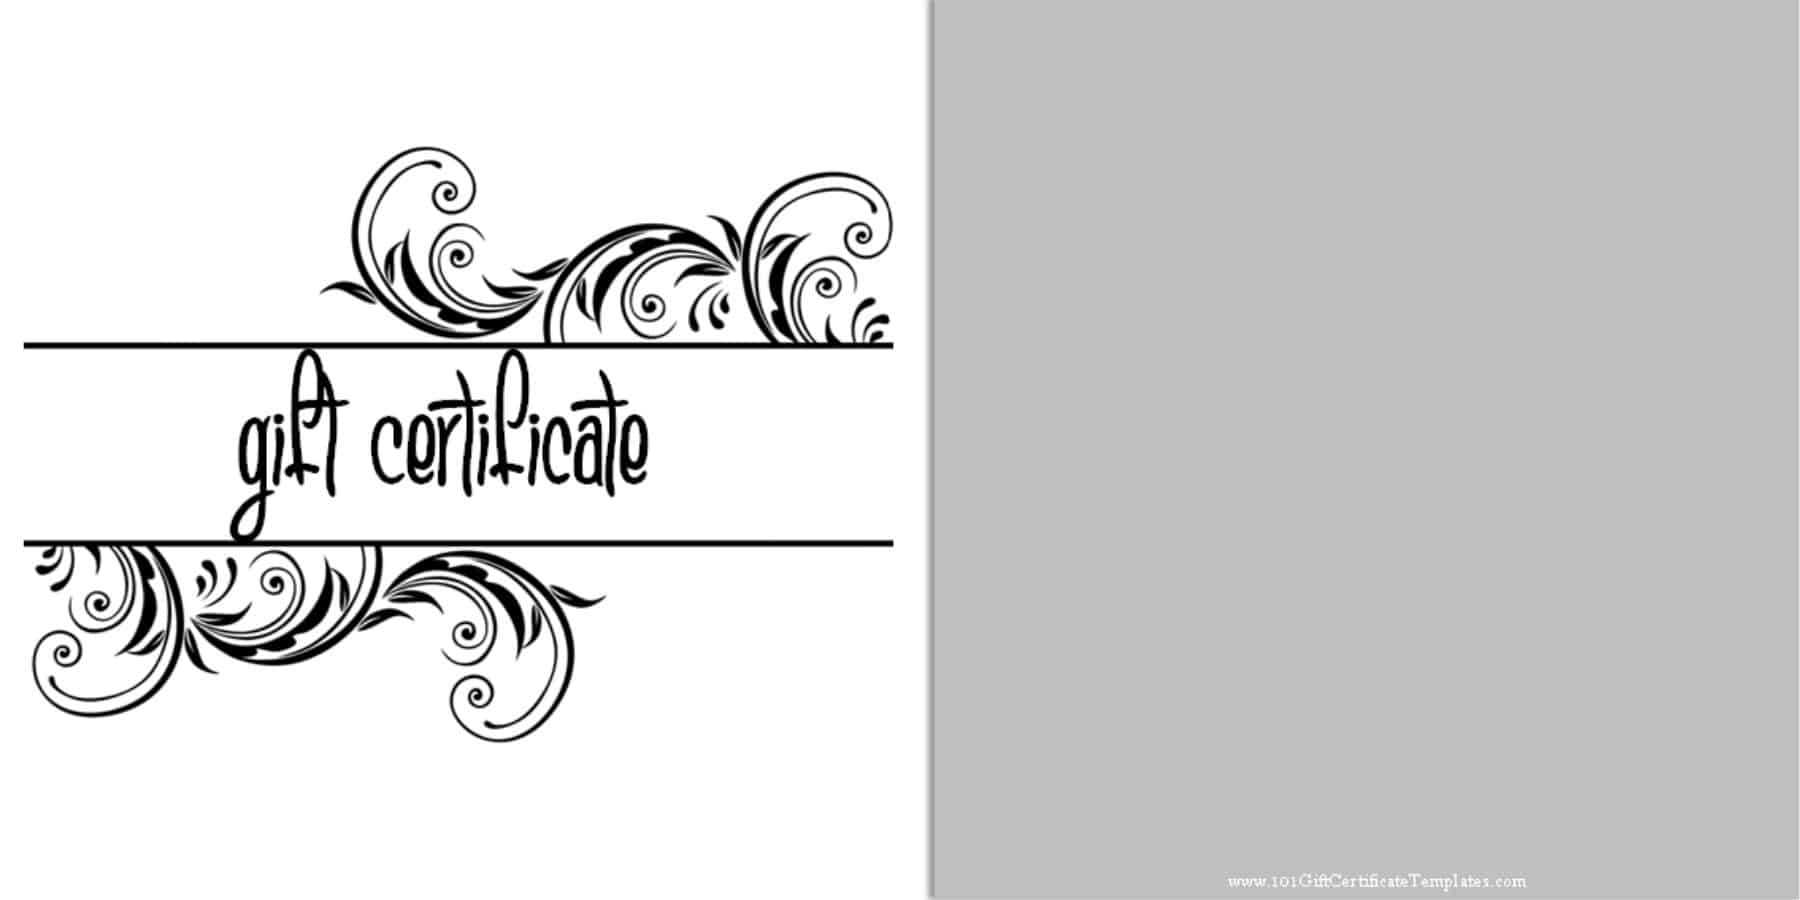 Printable Gift Certificate Templates Pertaining To Black And White Gift Certificate Template Free